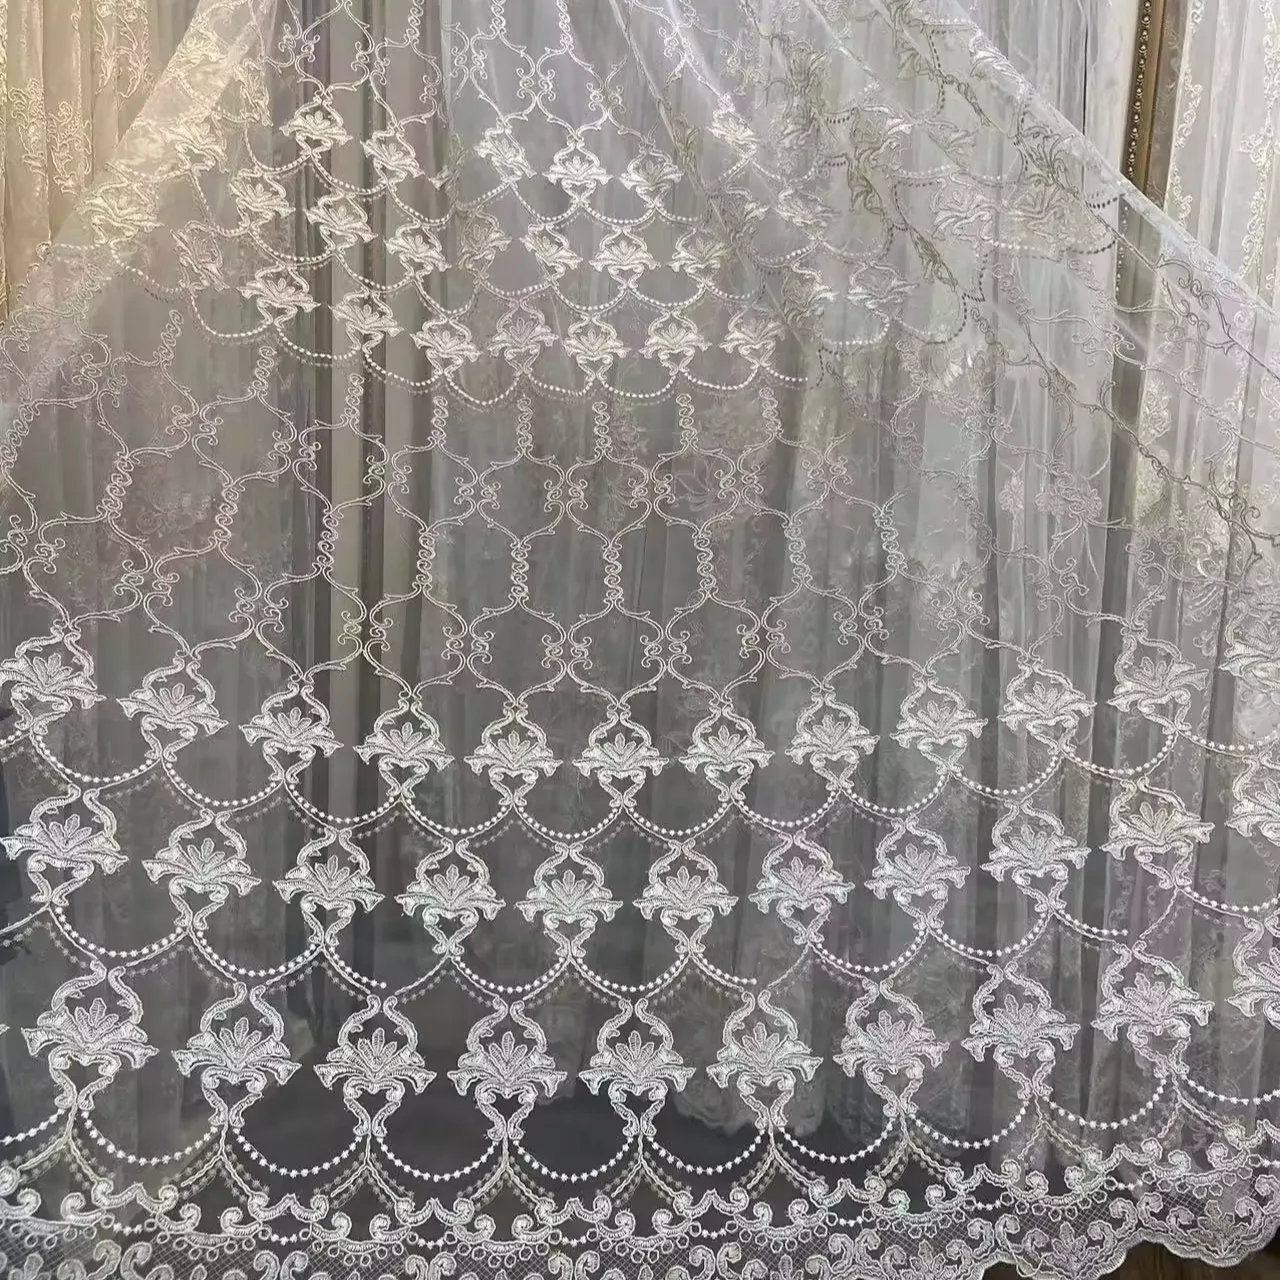 2024 Luxury New European Style Curtains For Living Room Bedroom Double Layer Tulle Gauze Extravagance Embroidered Window Screens